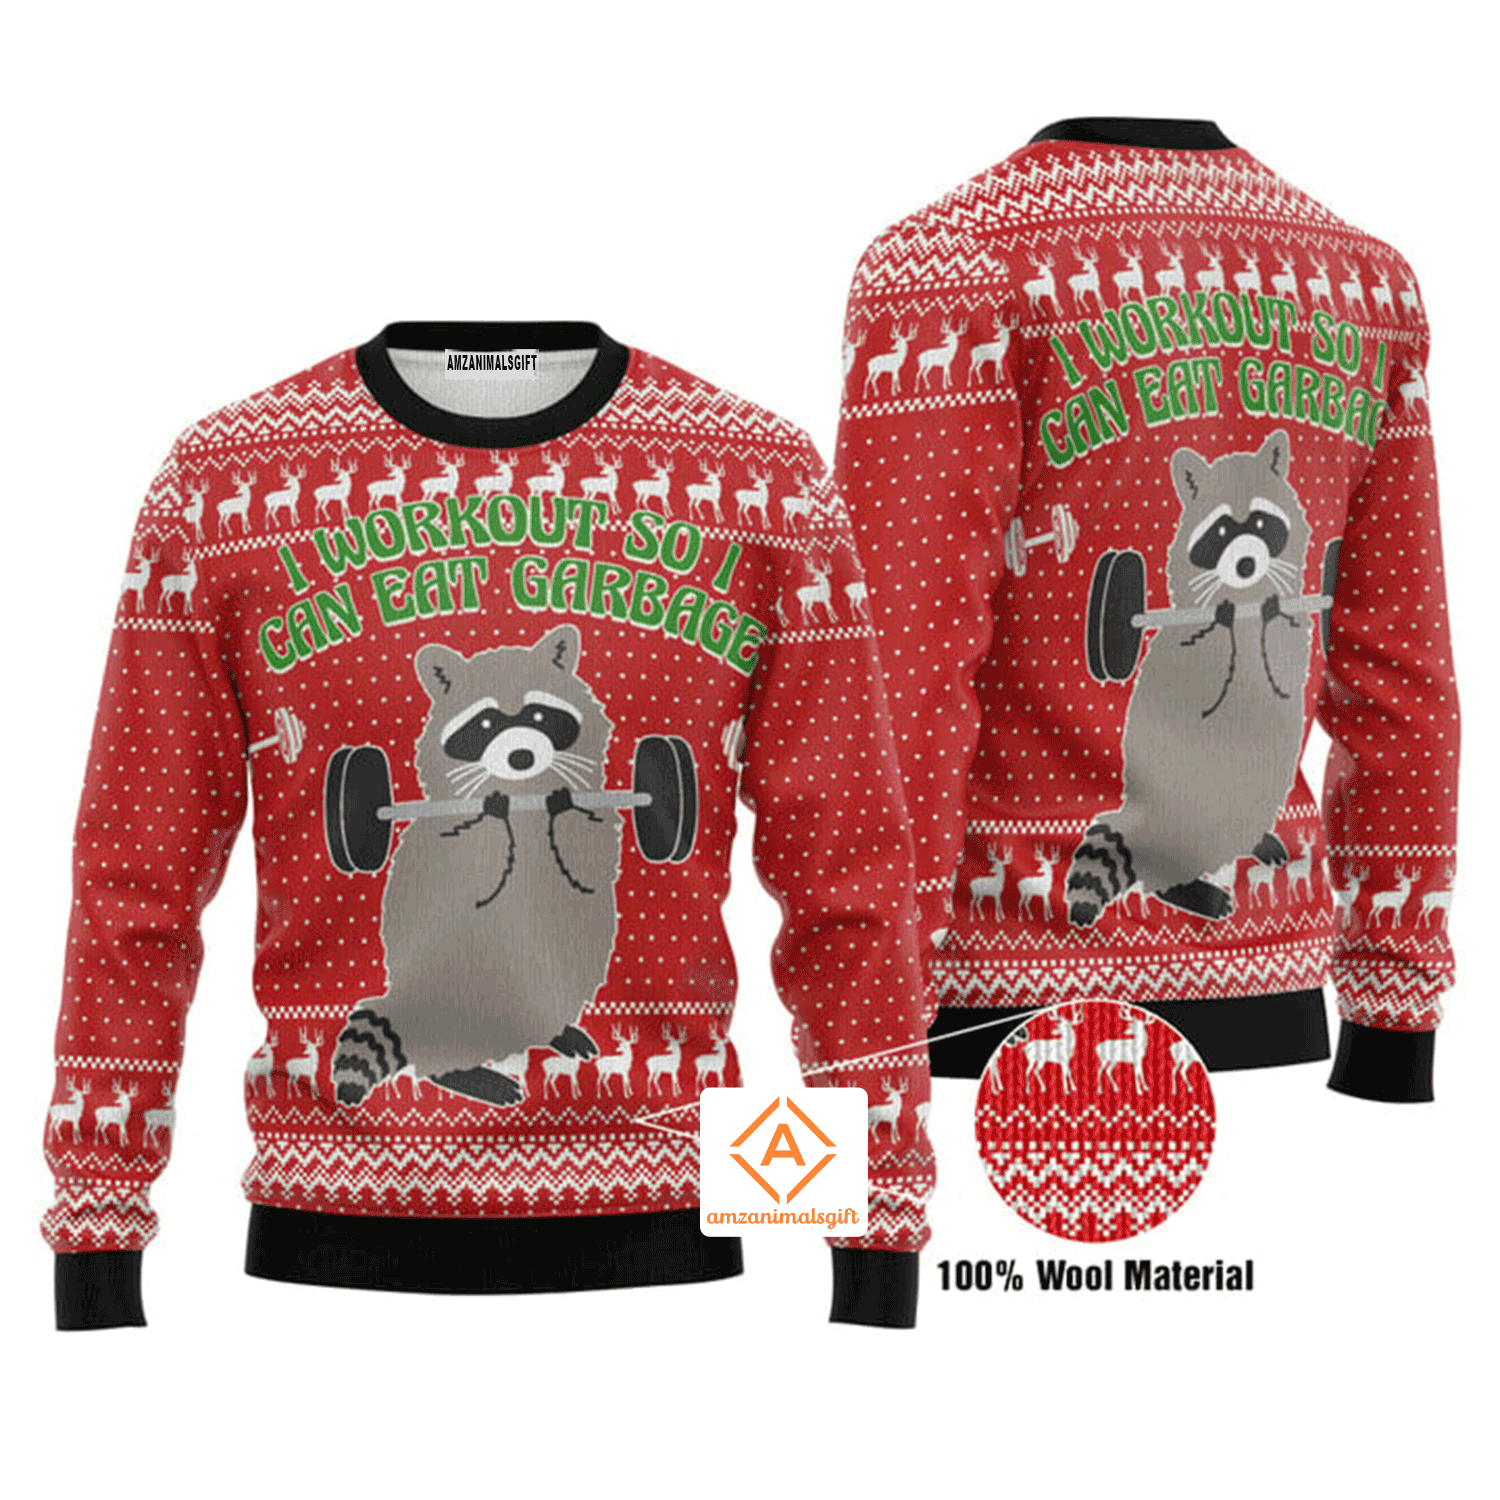 Raccoon Christmas Sweater I Workout So I Can Eat Garbage, Ugly Sweater For Men & Women, Perfect Outfit For Christmas New Year Autumn Winter